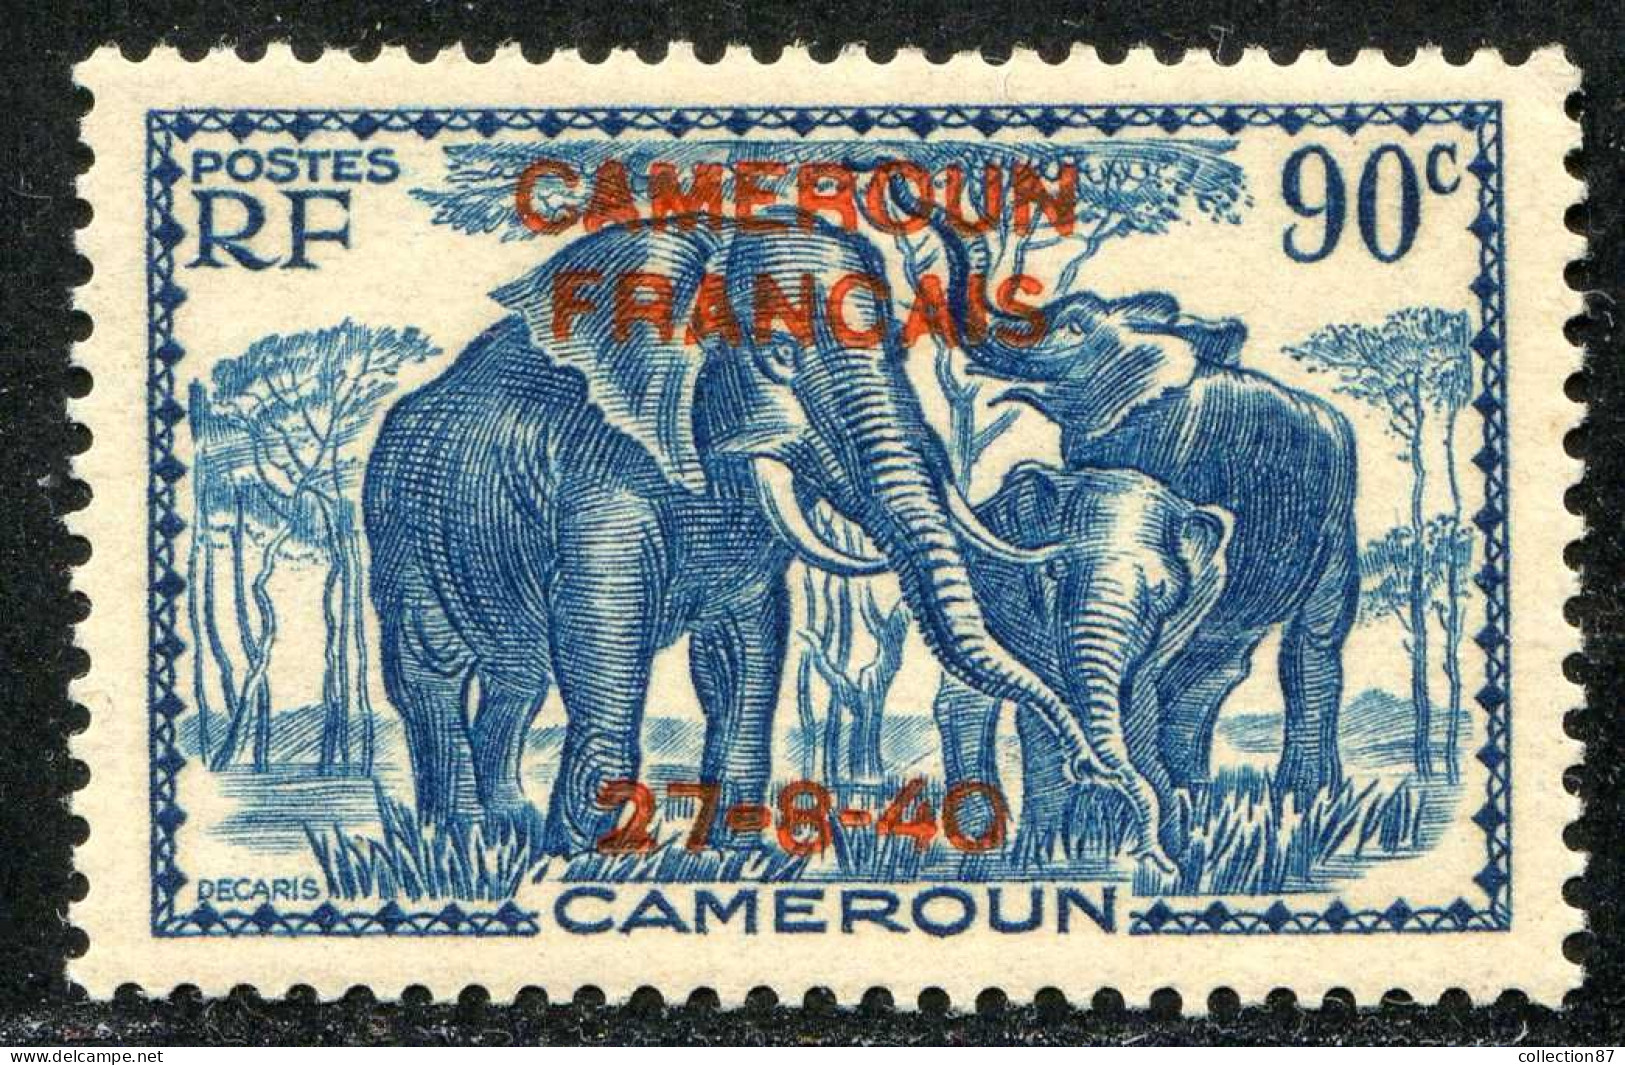 REF090 > CAMEROUN < Yv N° 222 * * Neuf Luxe Dos Visible -- MNH * * -- ELEPHANT - Ungebraucht